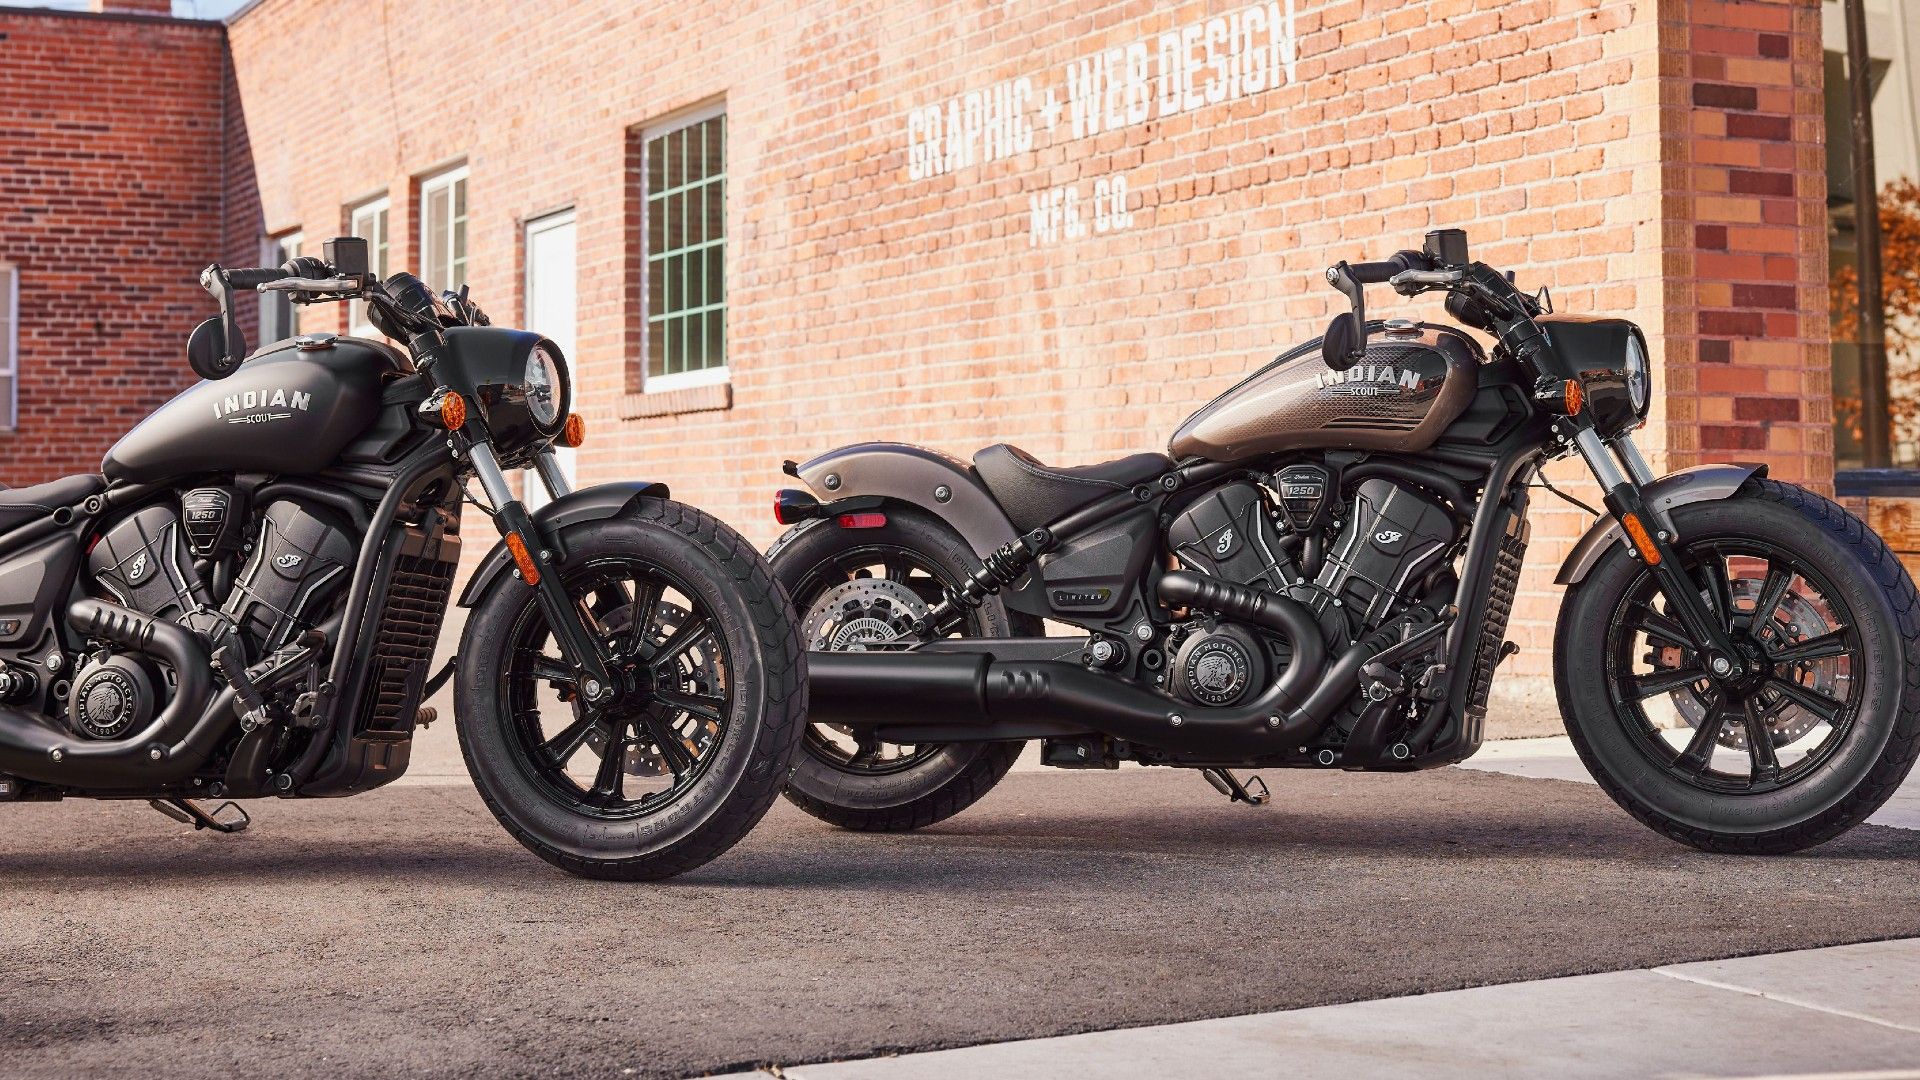 15 Reasons Why The Indian Scout Bobber Is The Ultimate Daily Rider